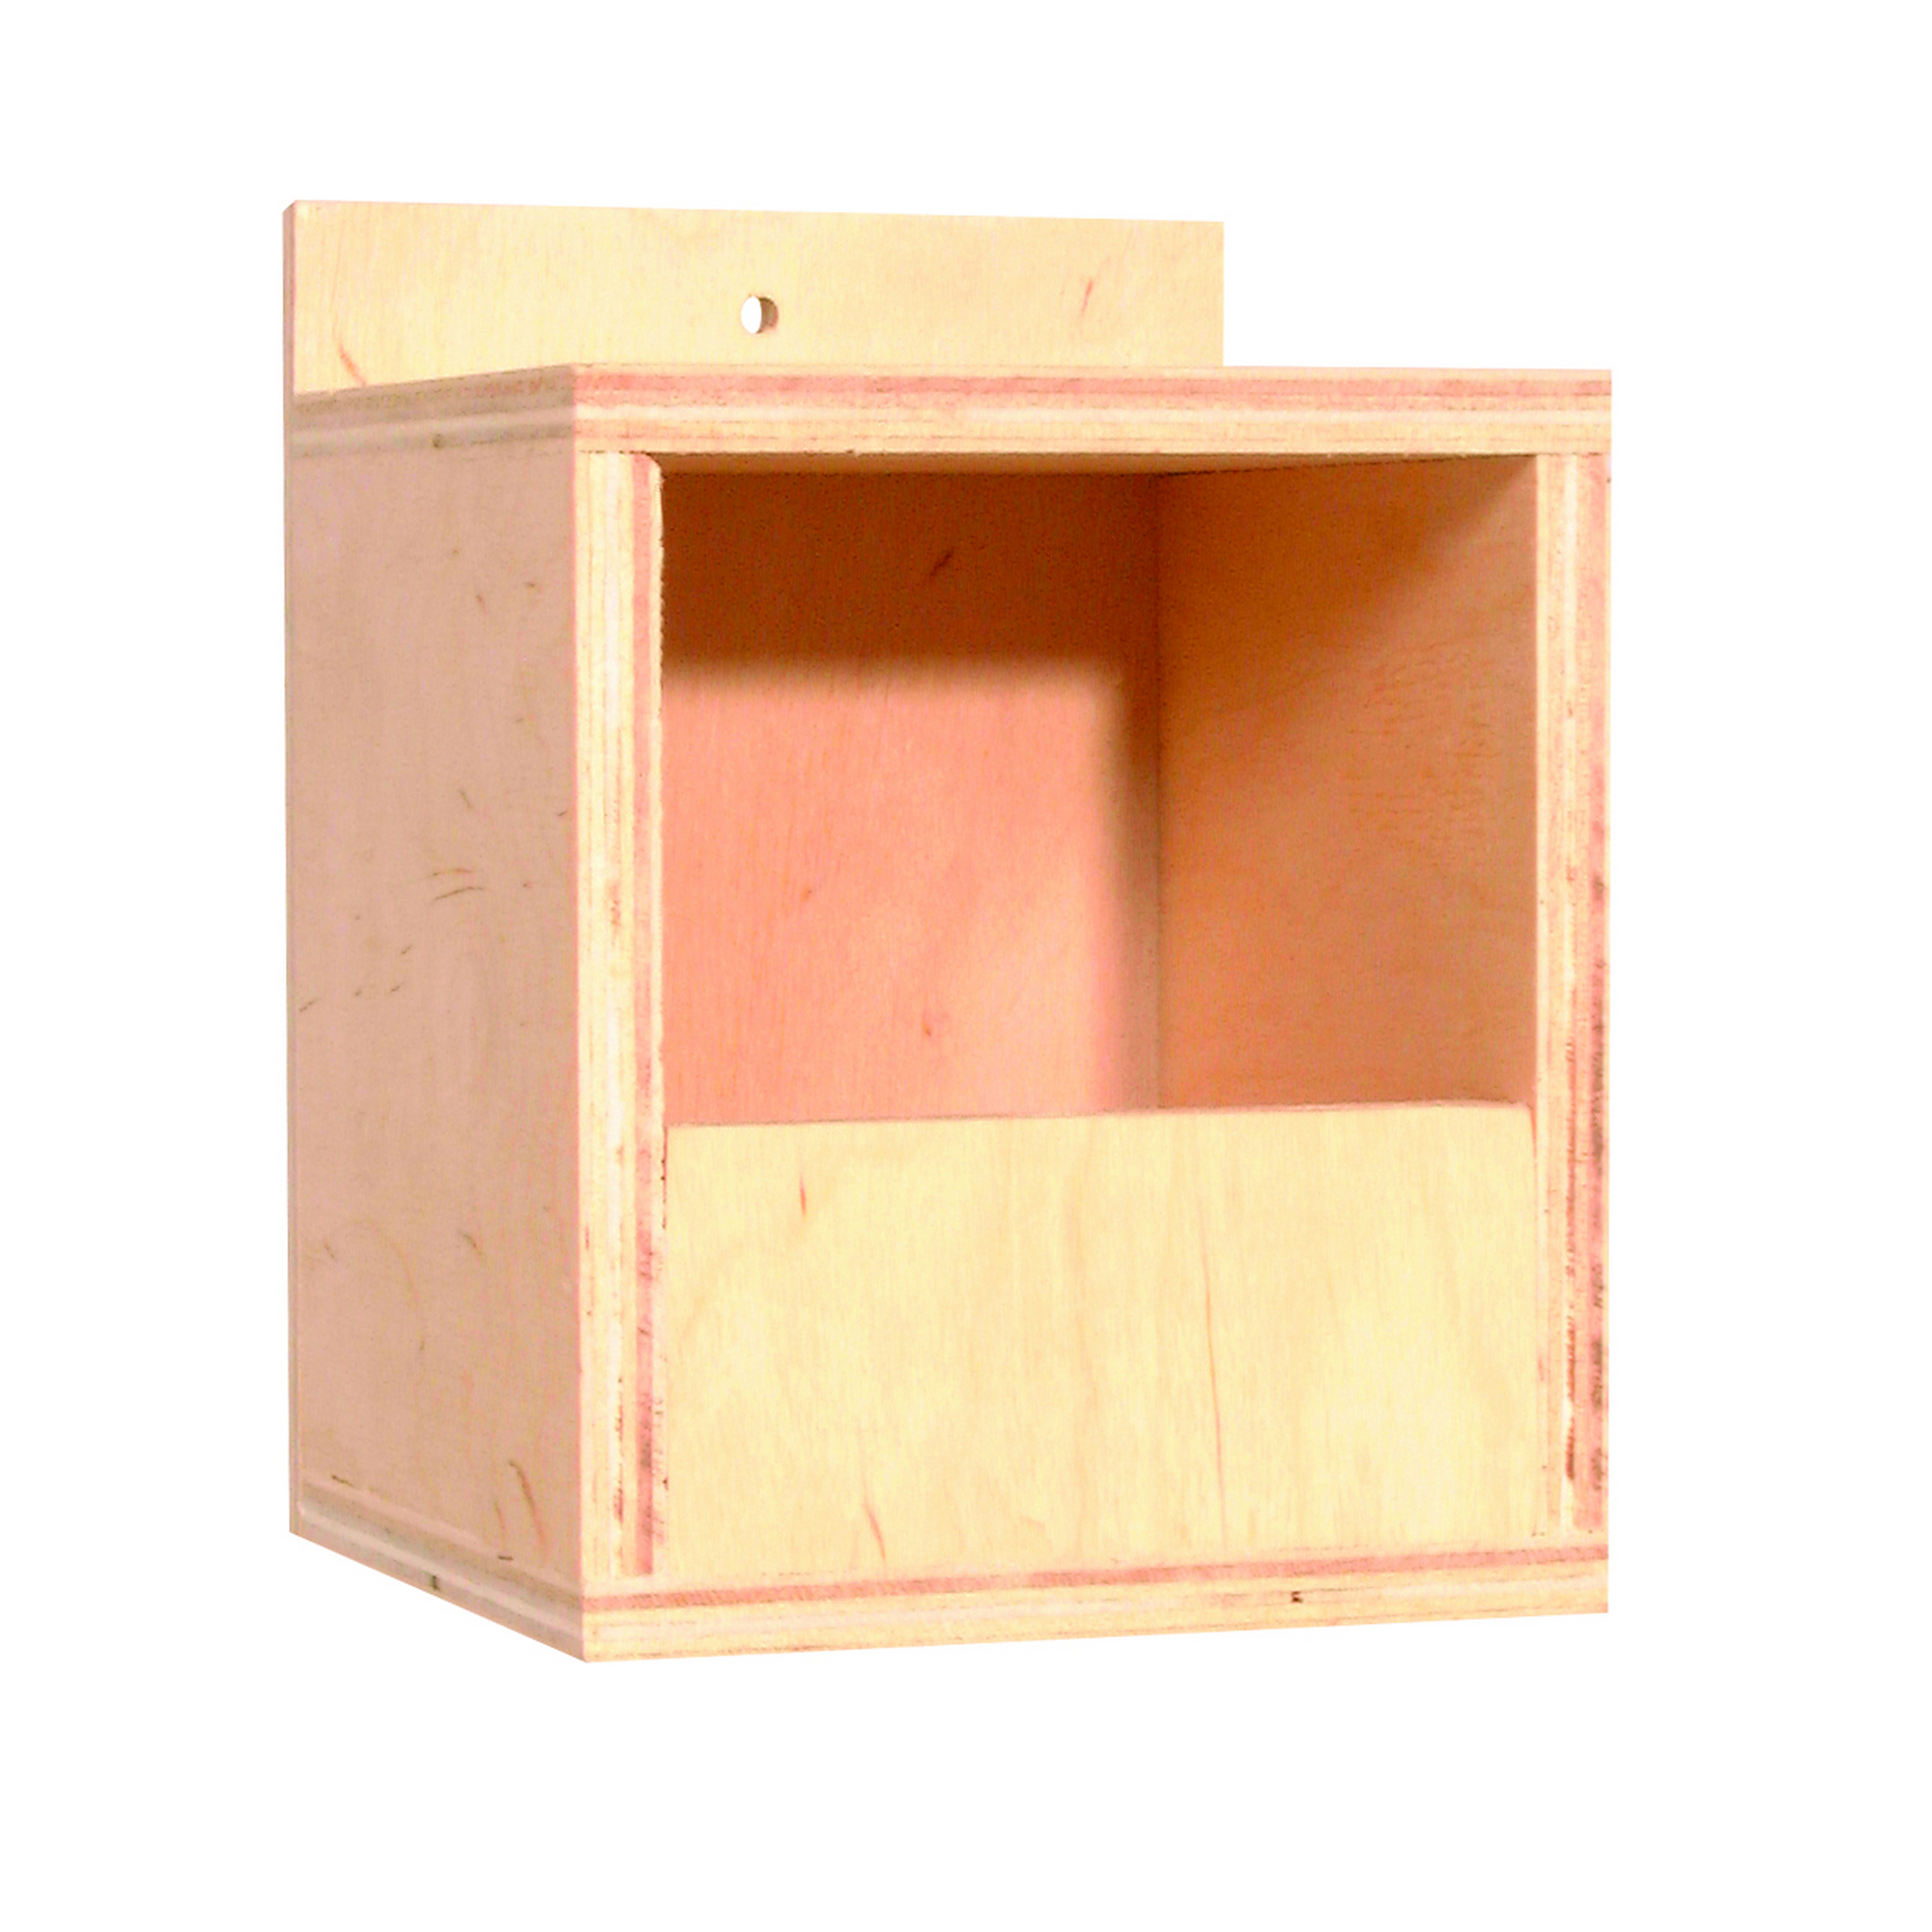 Exotennest Holz 10 x 10 x 10 cm + product picture